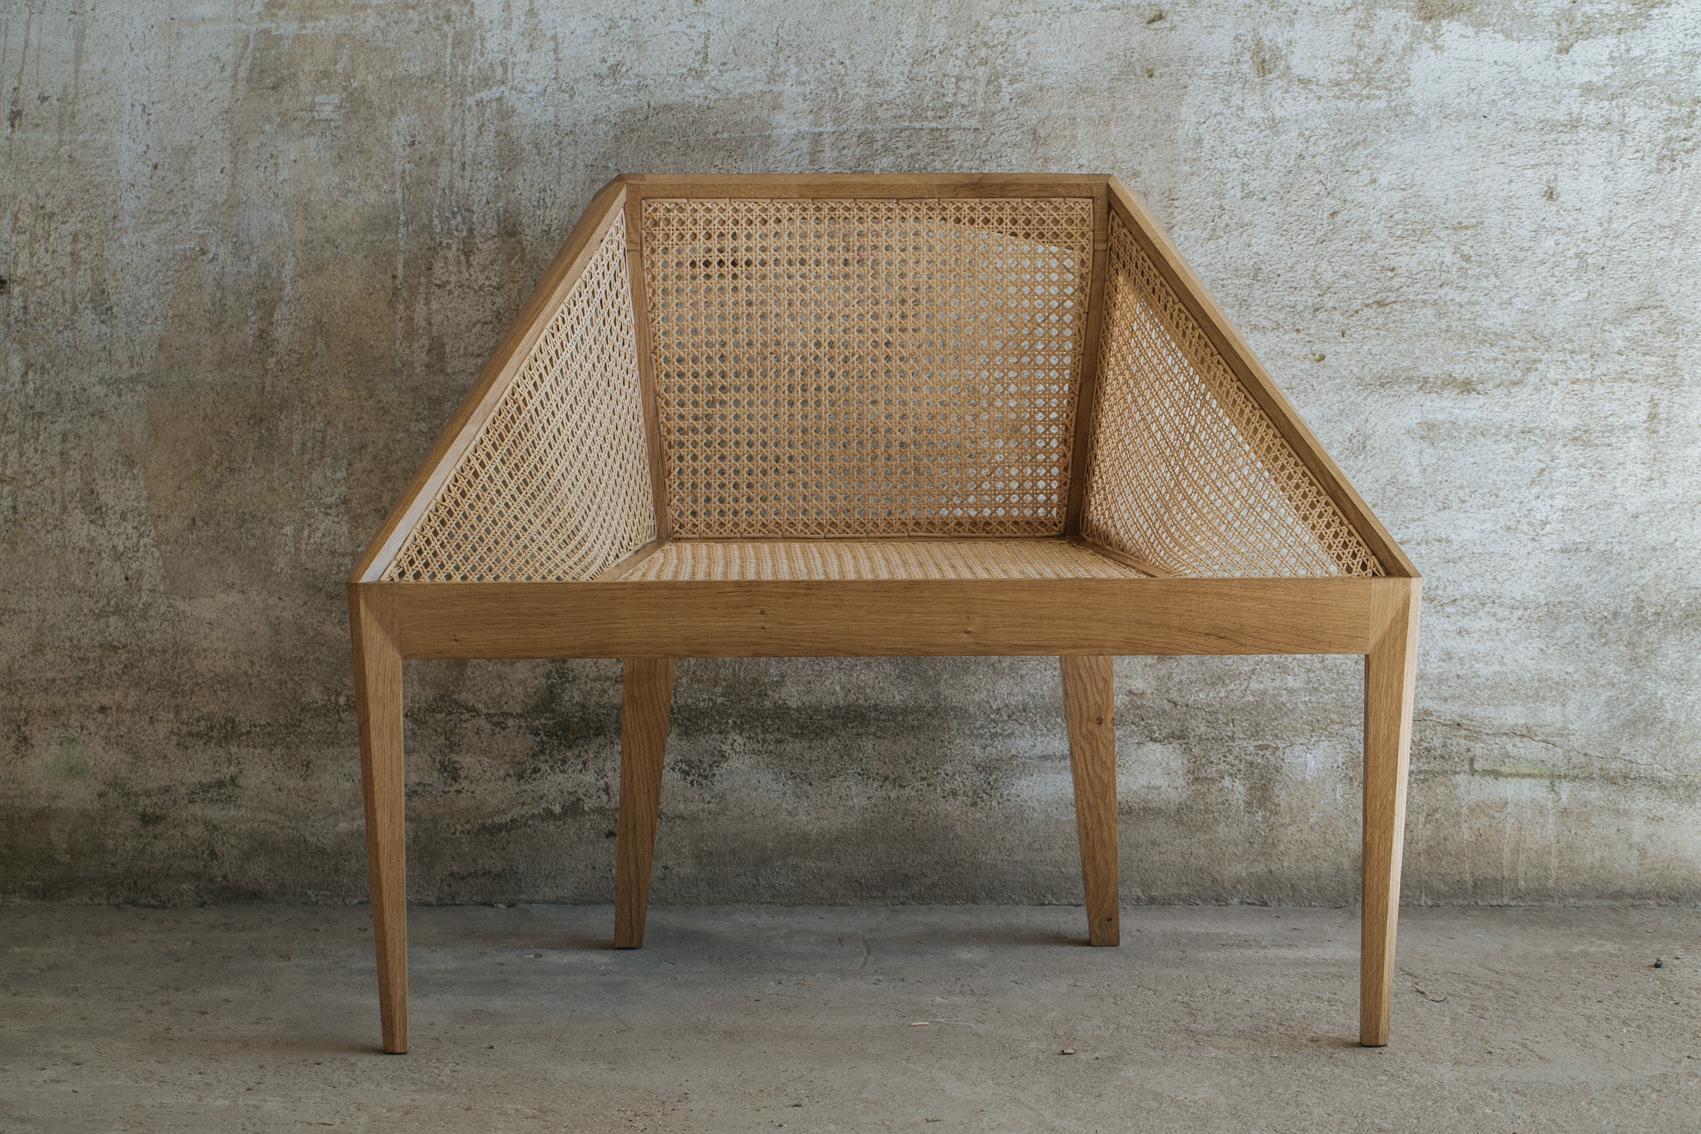 Portuguese Chair 1. Wicker Weave Light and Sculptural Lounge Chair Prototype by Tomaz Viana For Sale